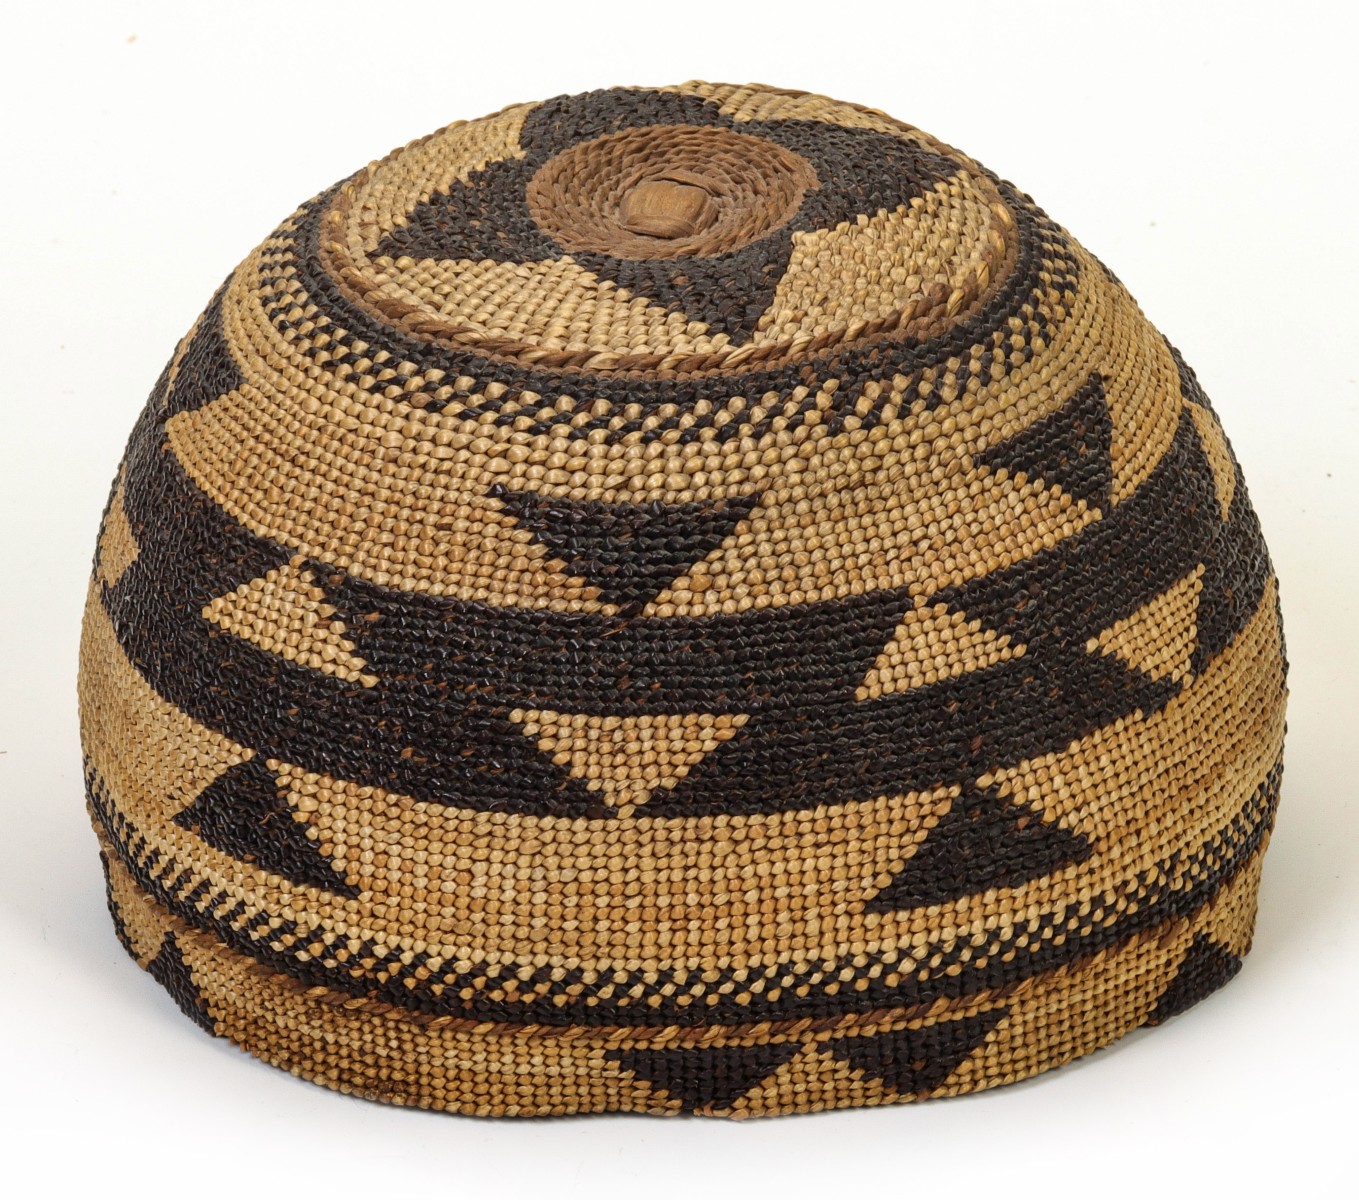 A NICELY CONSTRUCTED HUPA WOMAN'S HAT CIRCA 1920